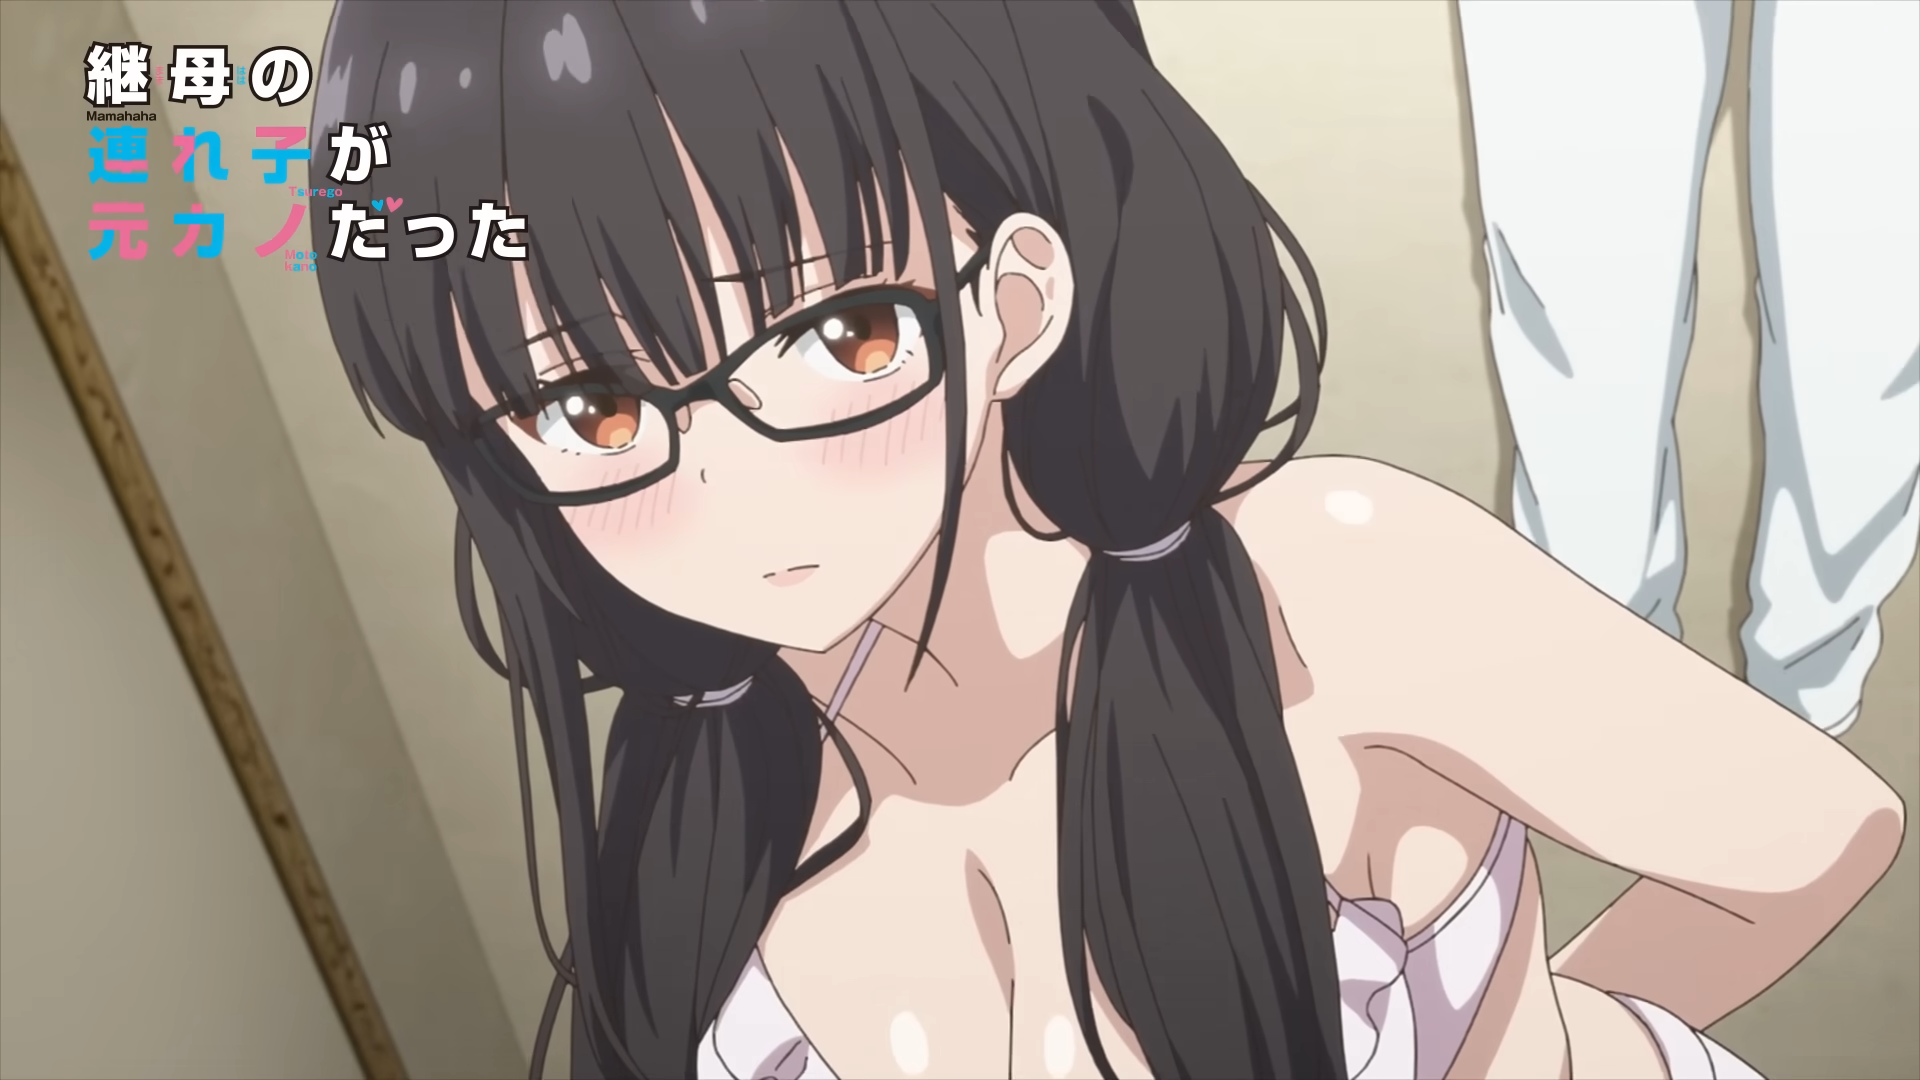 3rd 'My Stepmother's Daughter Was My Ex-Girlfriend' Anime Episode Previewed